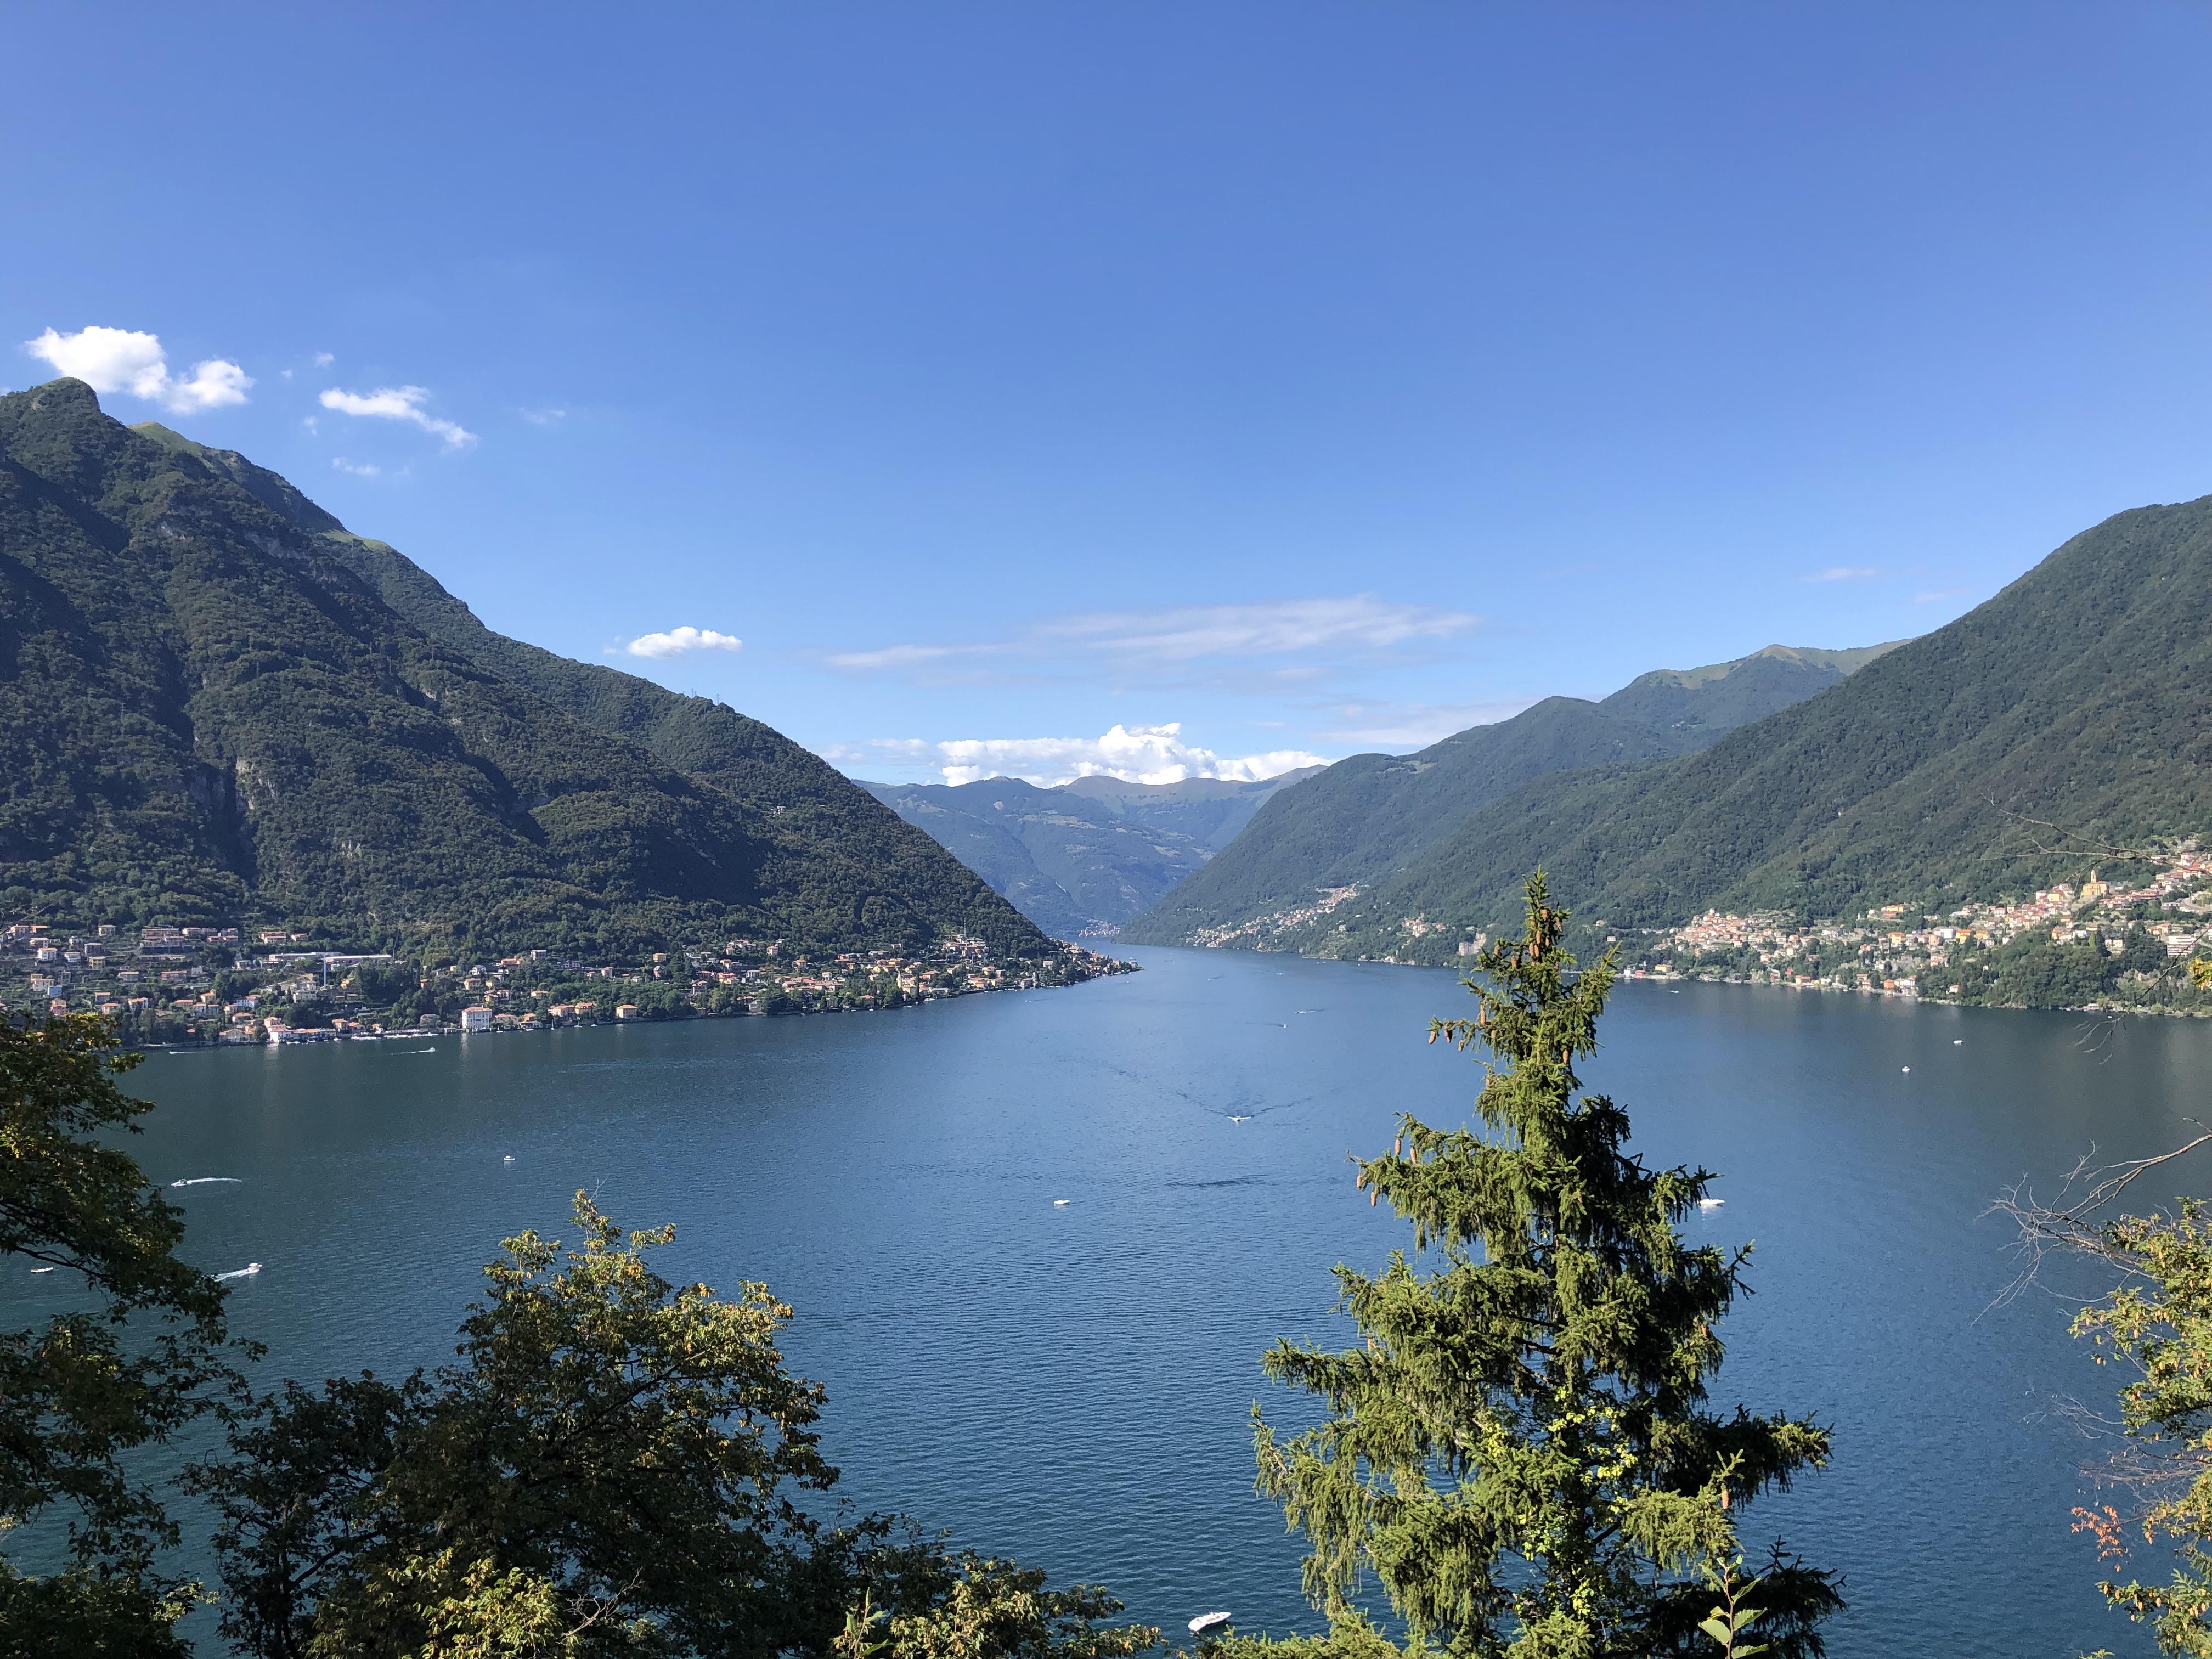 View out over Lake Como in Italy with green trees in the foreground and mountains in the background